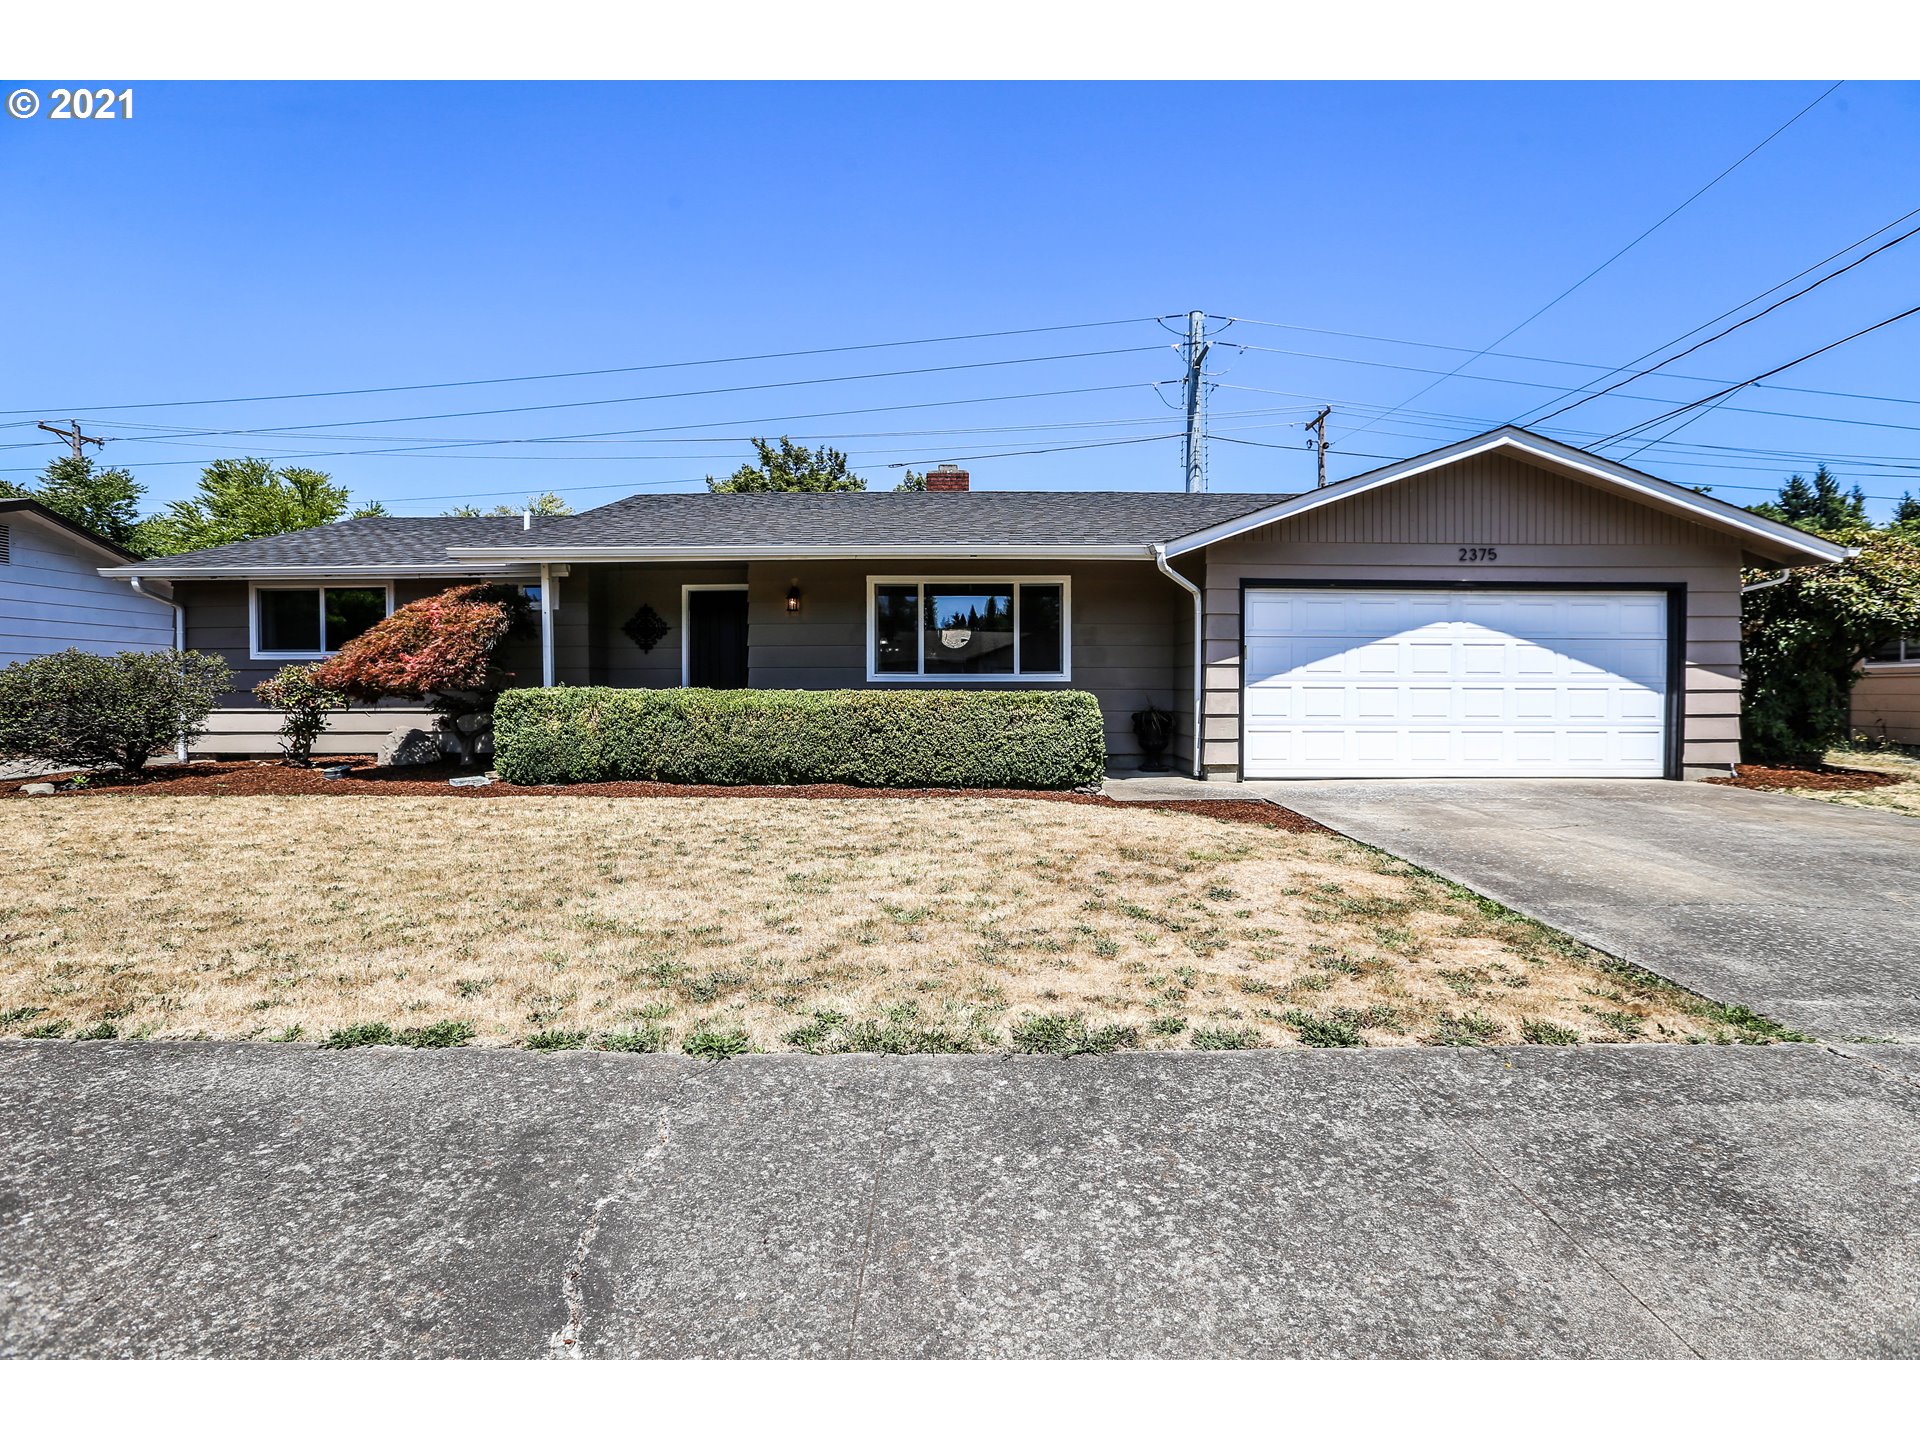 2375 PALMER AVE (1 of 17)